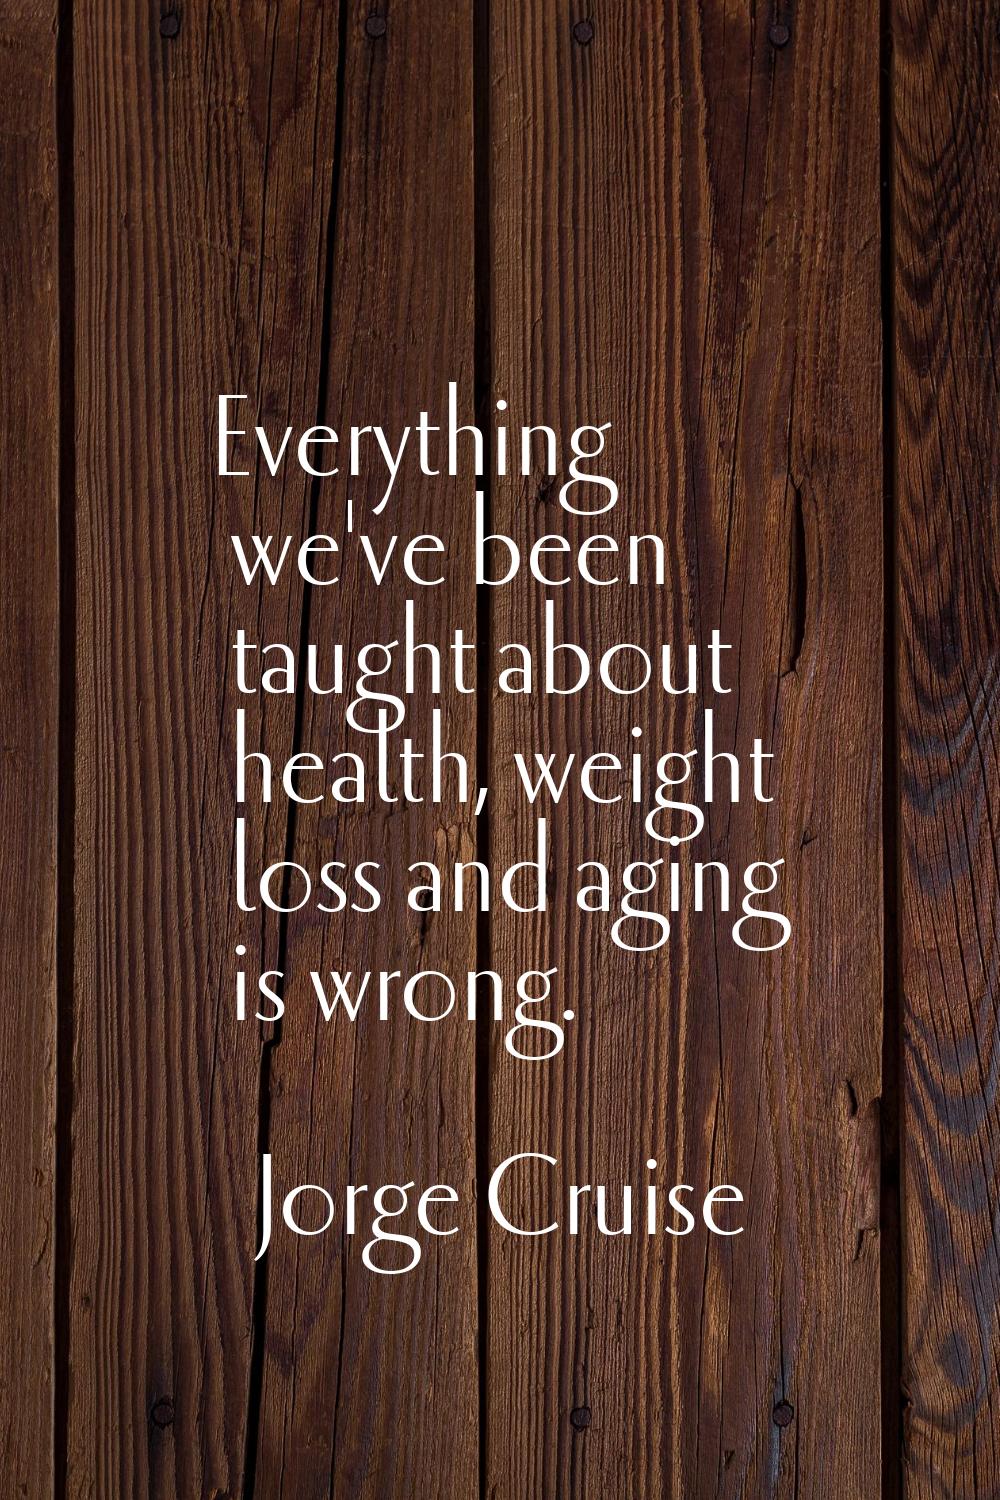 Everything we've been taught about health, weight loss and aging is wrong.